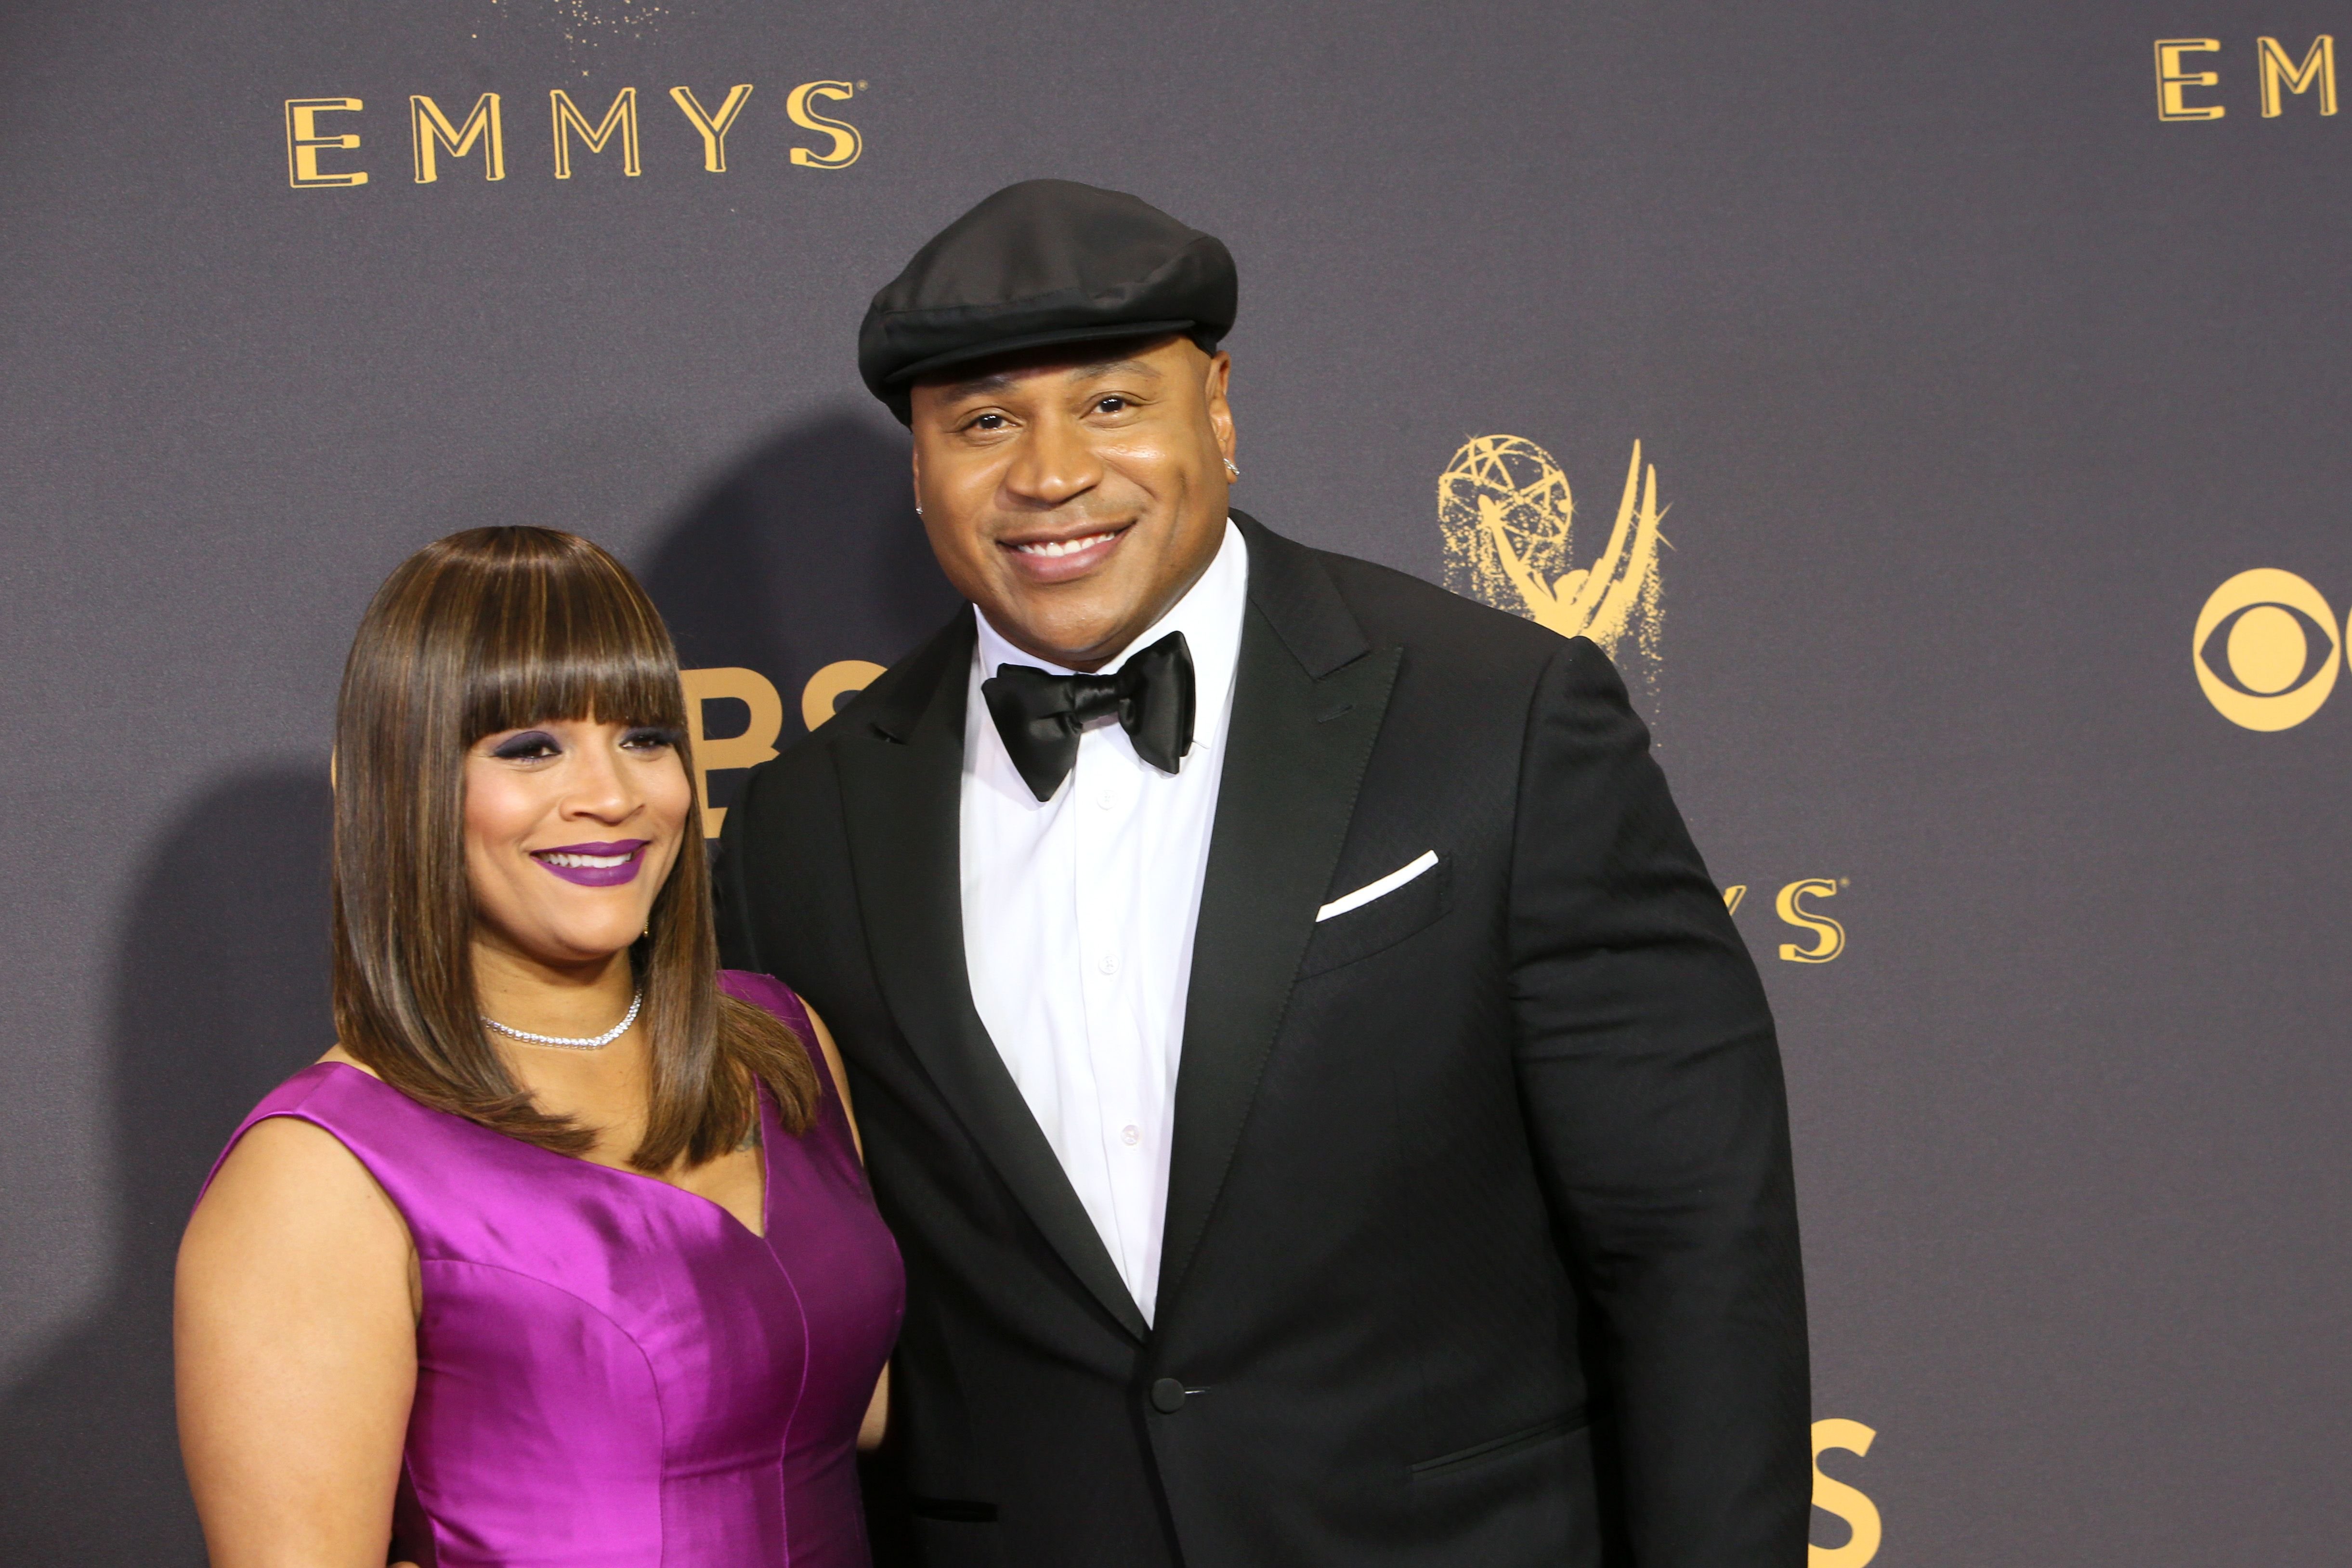 LL Cool J and wife Simone Smith attend the Emmy Awards | Source: Getty Images/GlobalImagesUkraine